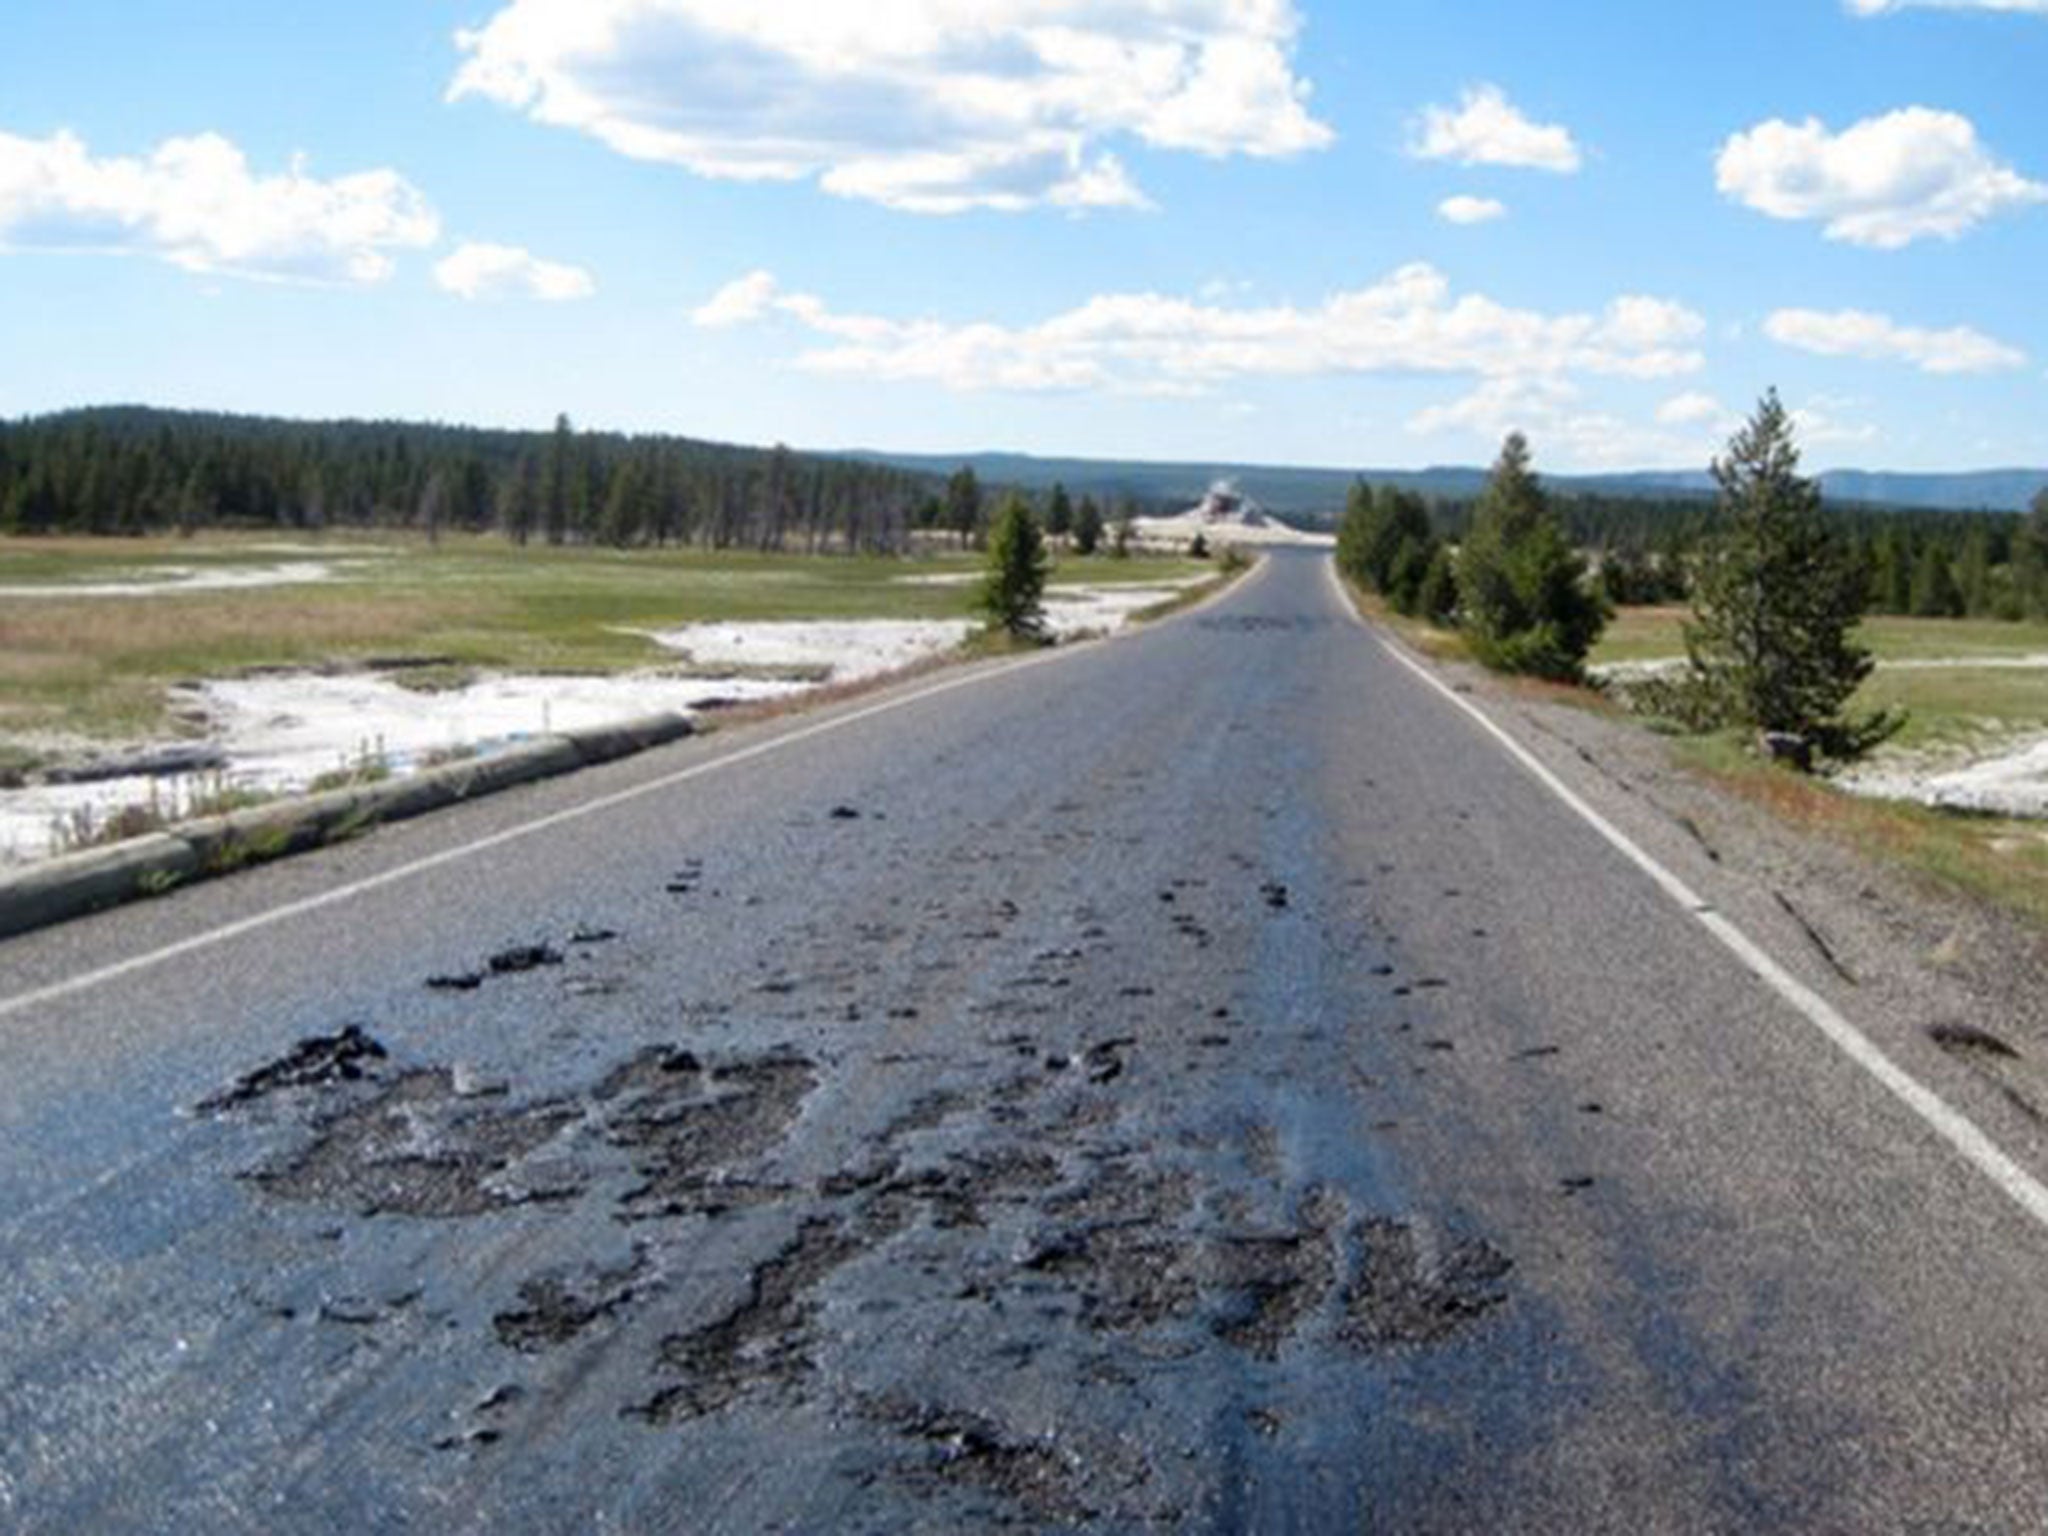 Damage to a Yellowstone National Park road caused by thermal features in the park in Wyoming.